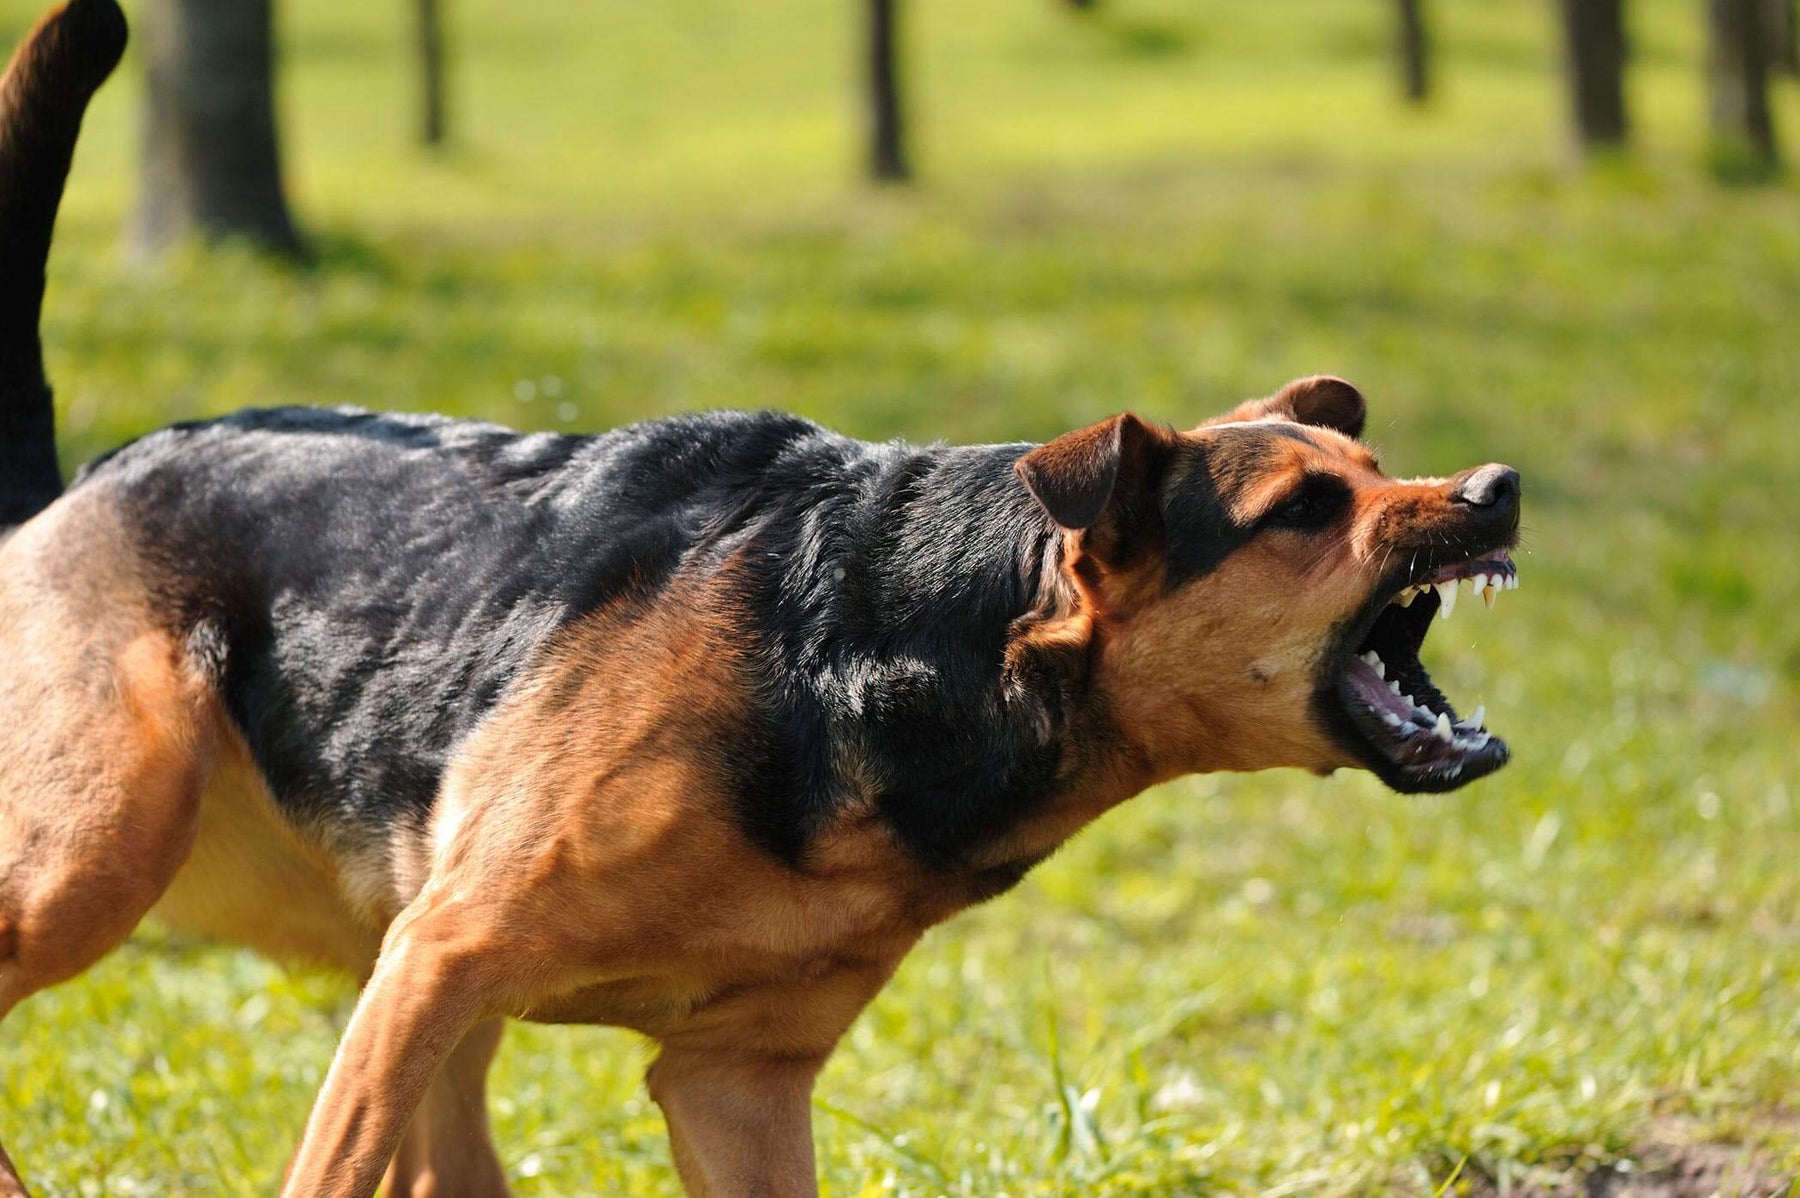 Training Tips: Prevent Dog Attacks by Socializing Your Aggressive Dog